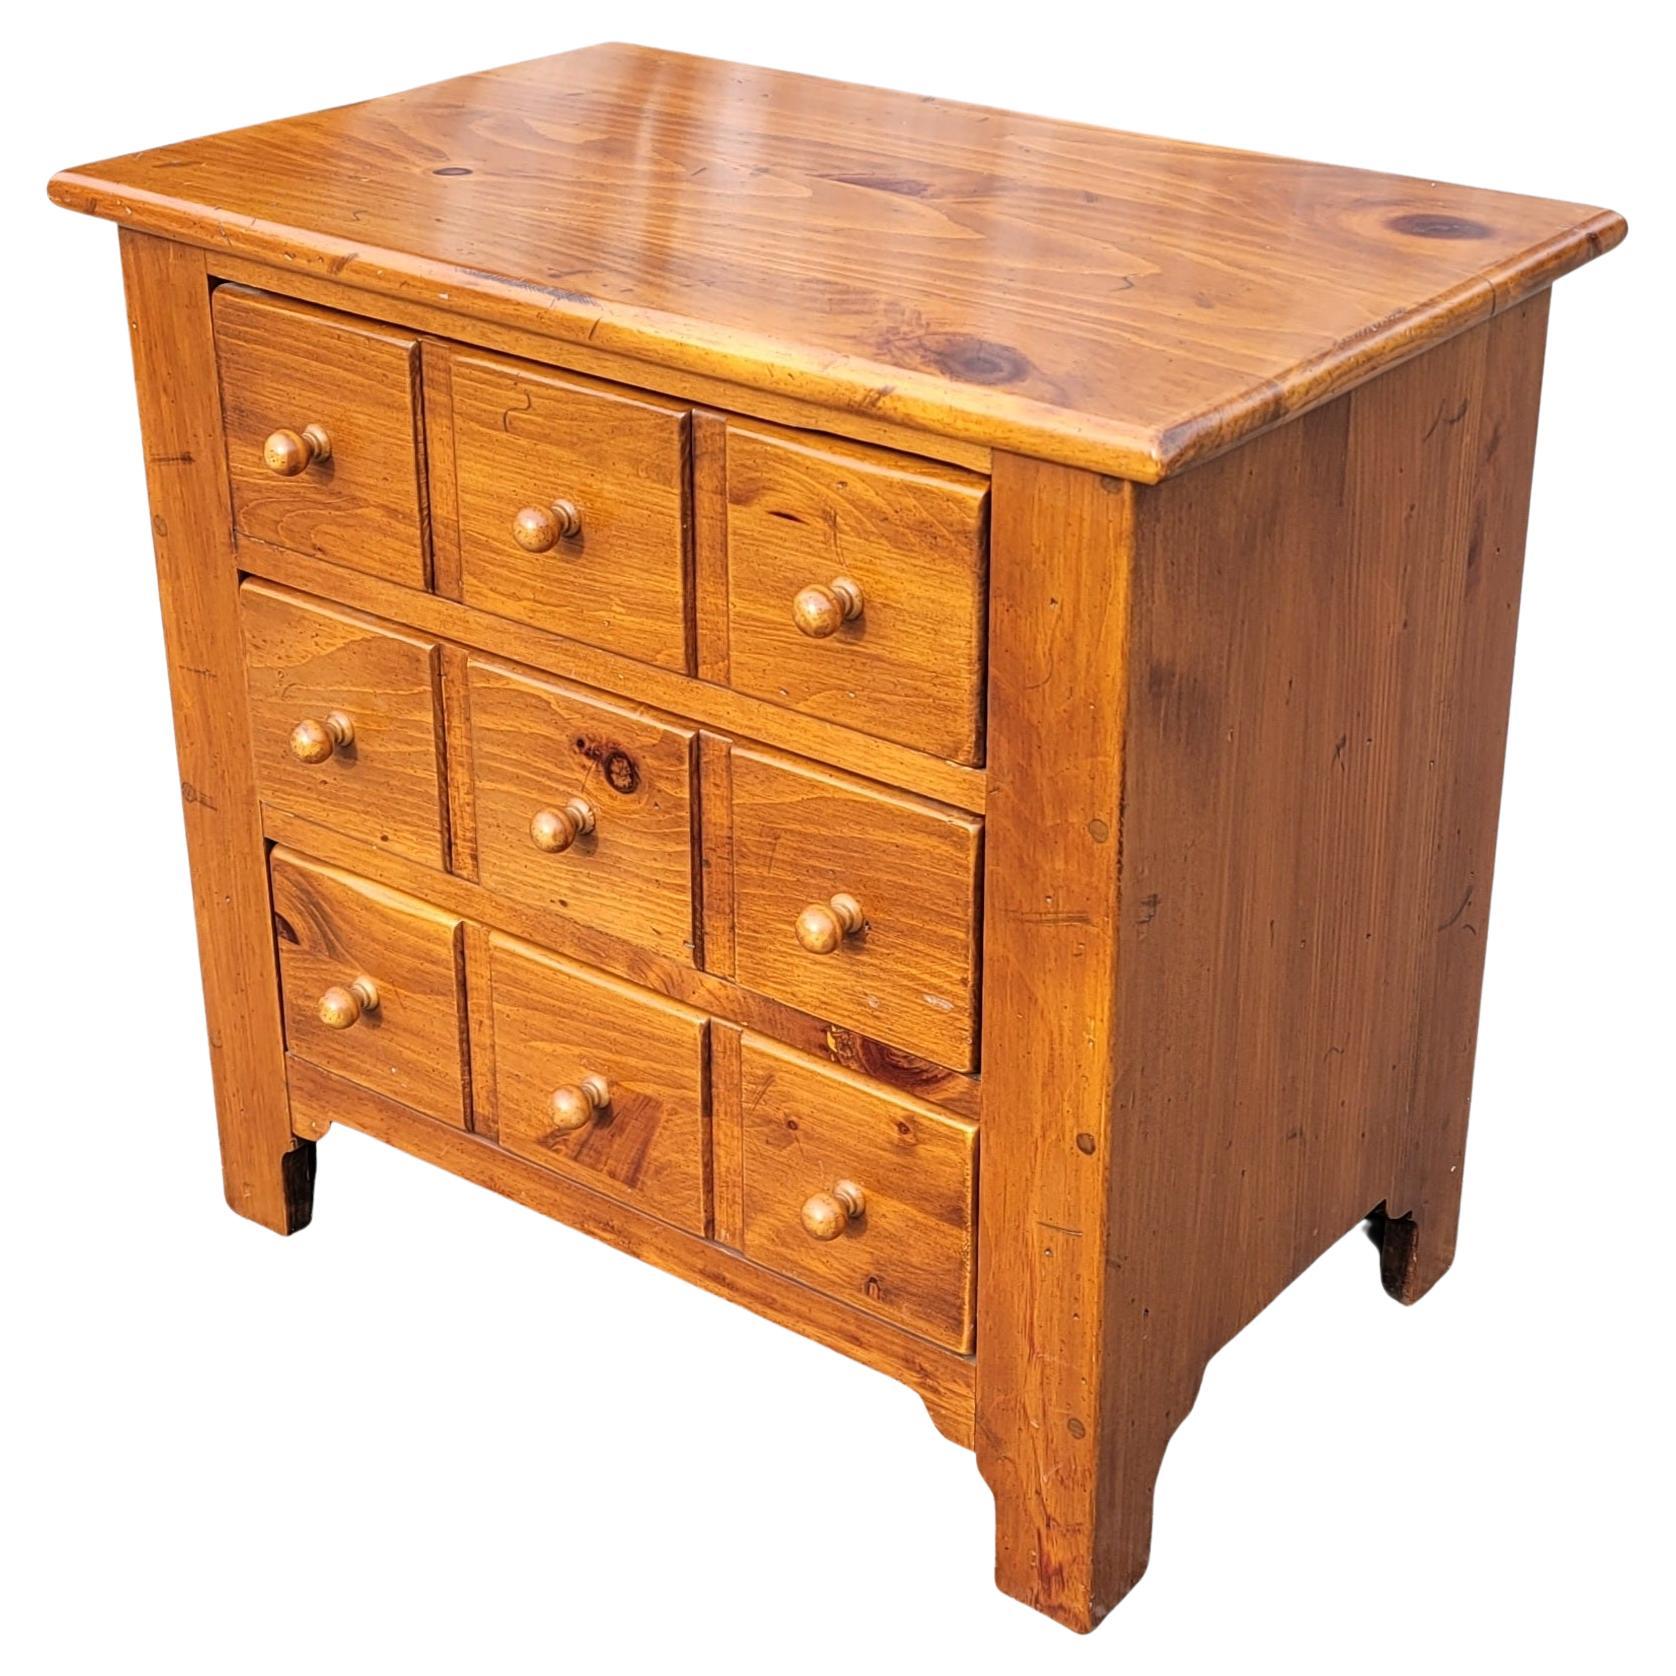 American Colonial Ethan Allen Early American Style Bedside Chest of Drawers